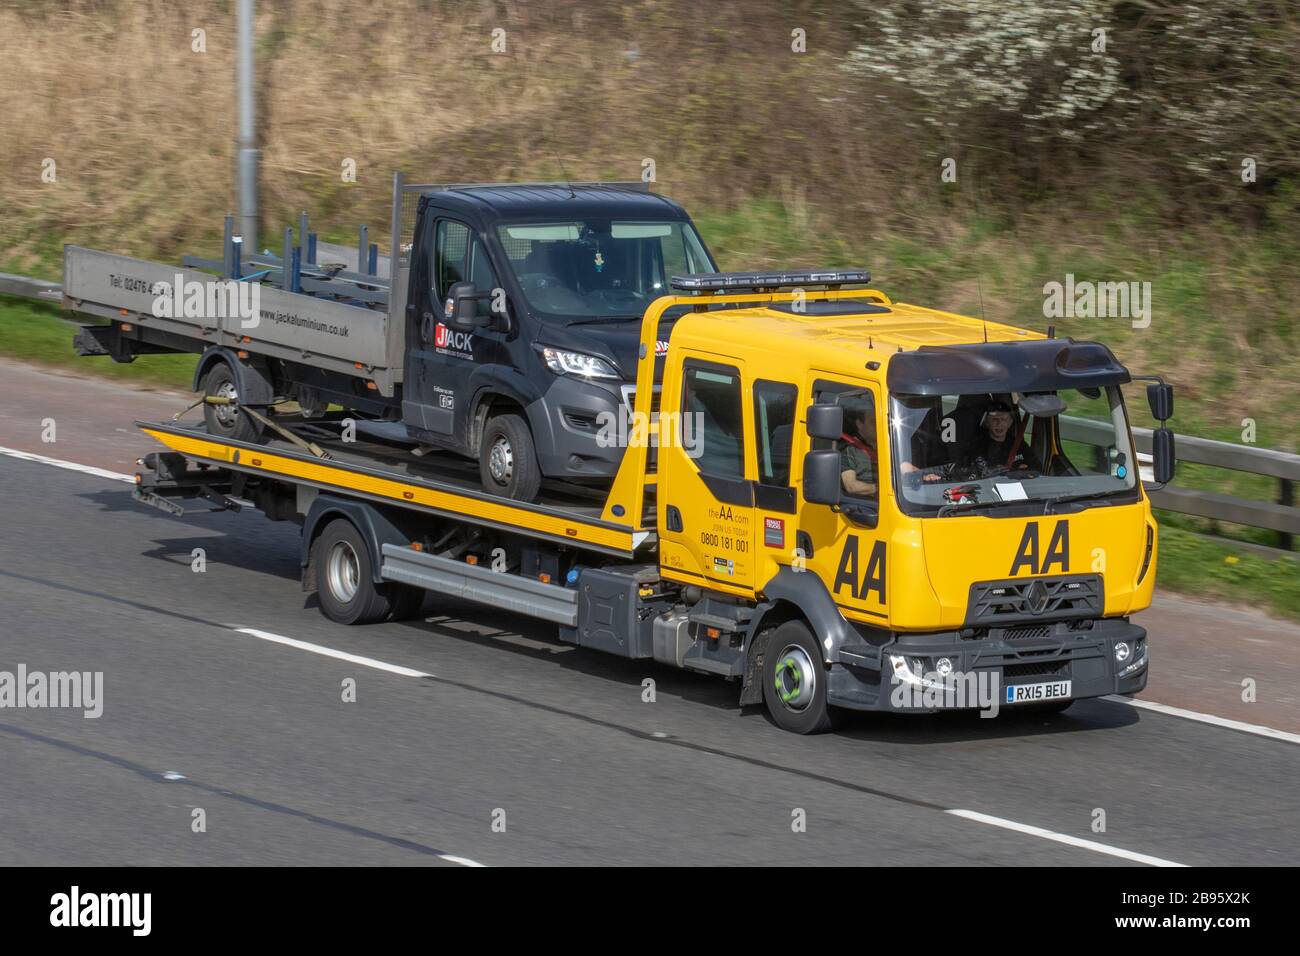 AA Double cab Van recovery truck carrying broken down van; Side view of rescue breakdown recovery roadside recovery lorry truck transporter transporting unmarked black van driving along  M6, Lancaster, UK; Vehicular traffic, transport, modern, on the 3 lane highway. Stock Photo